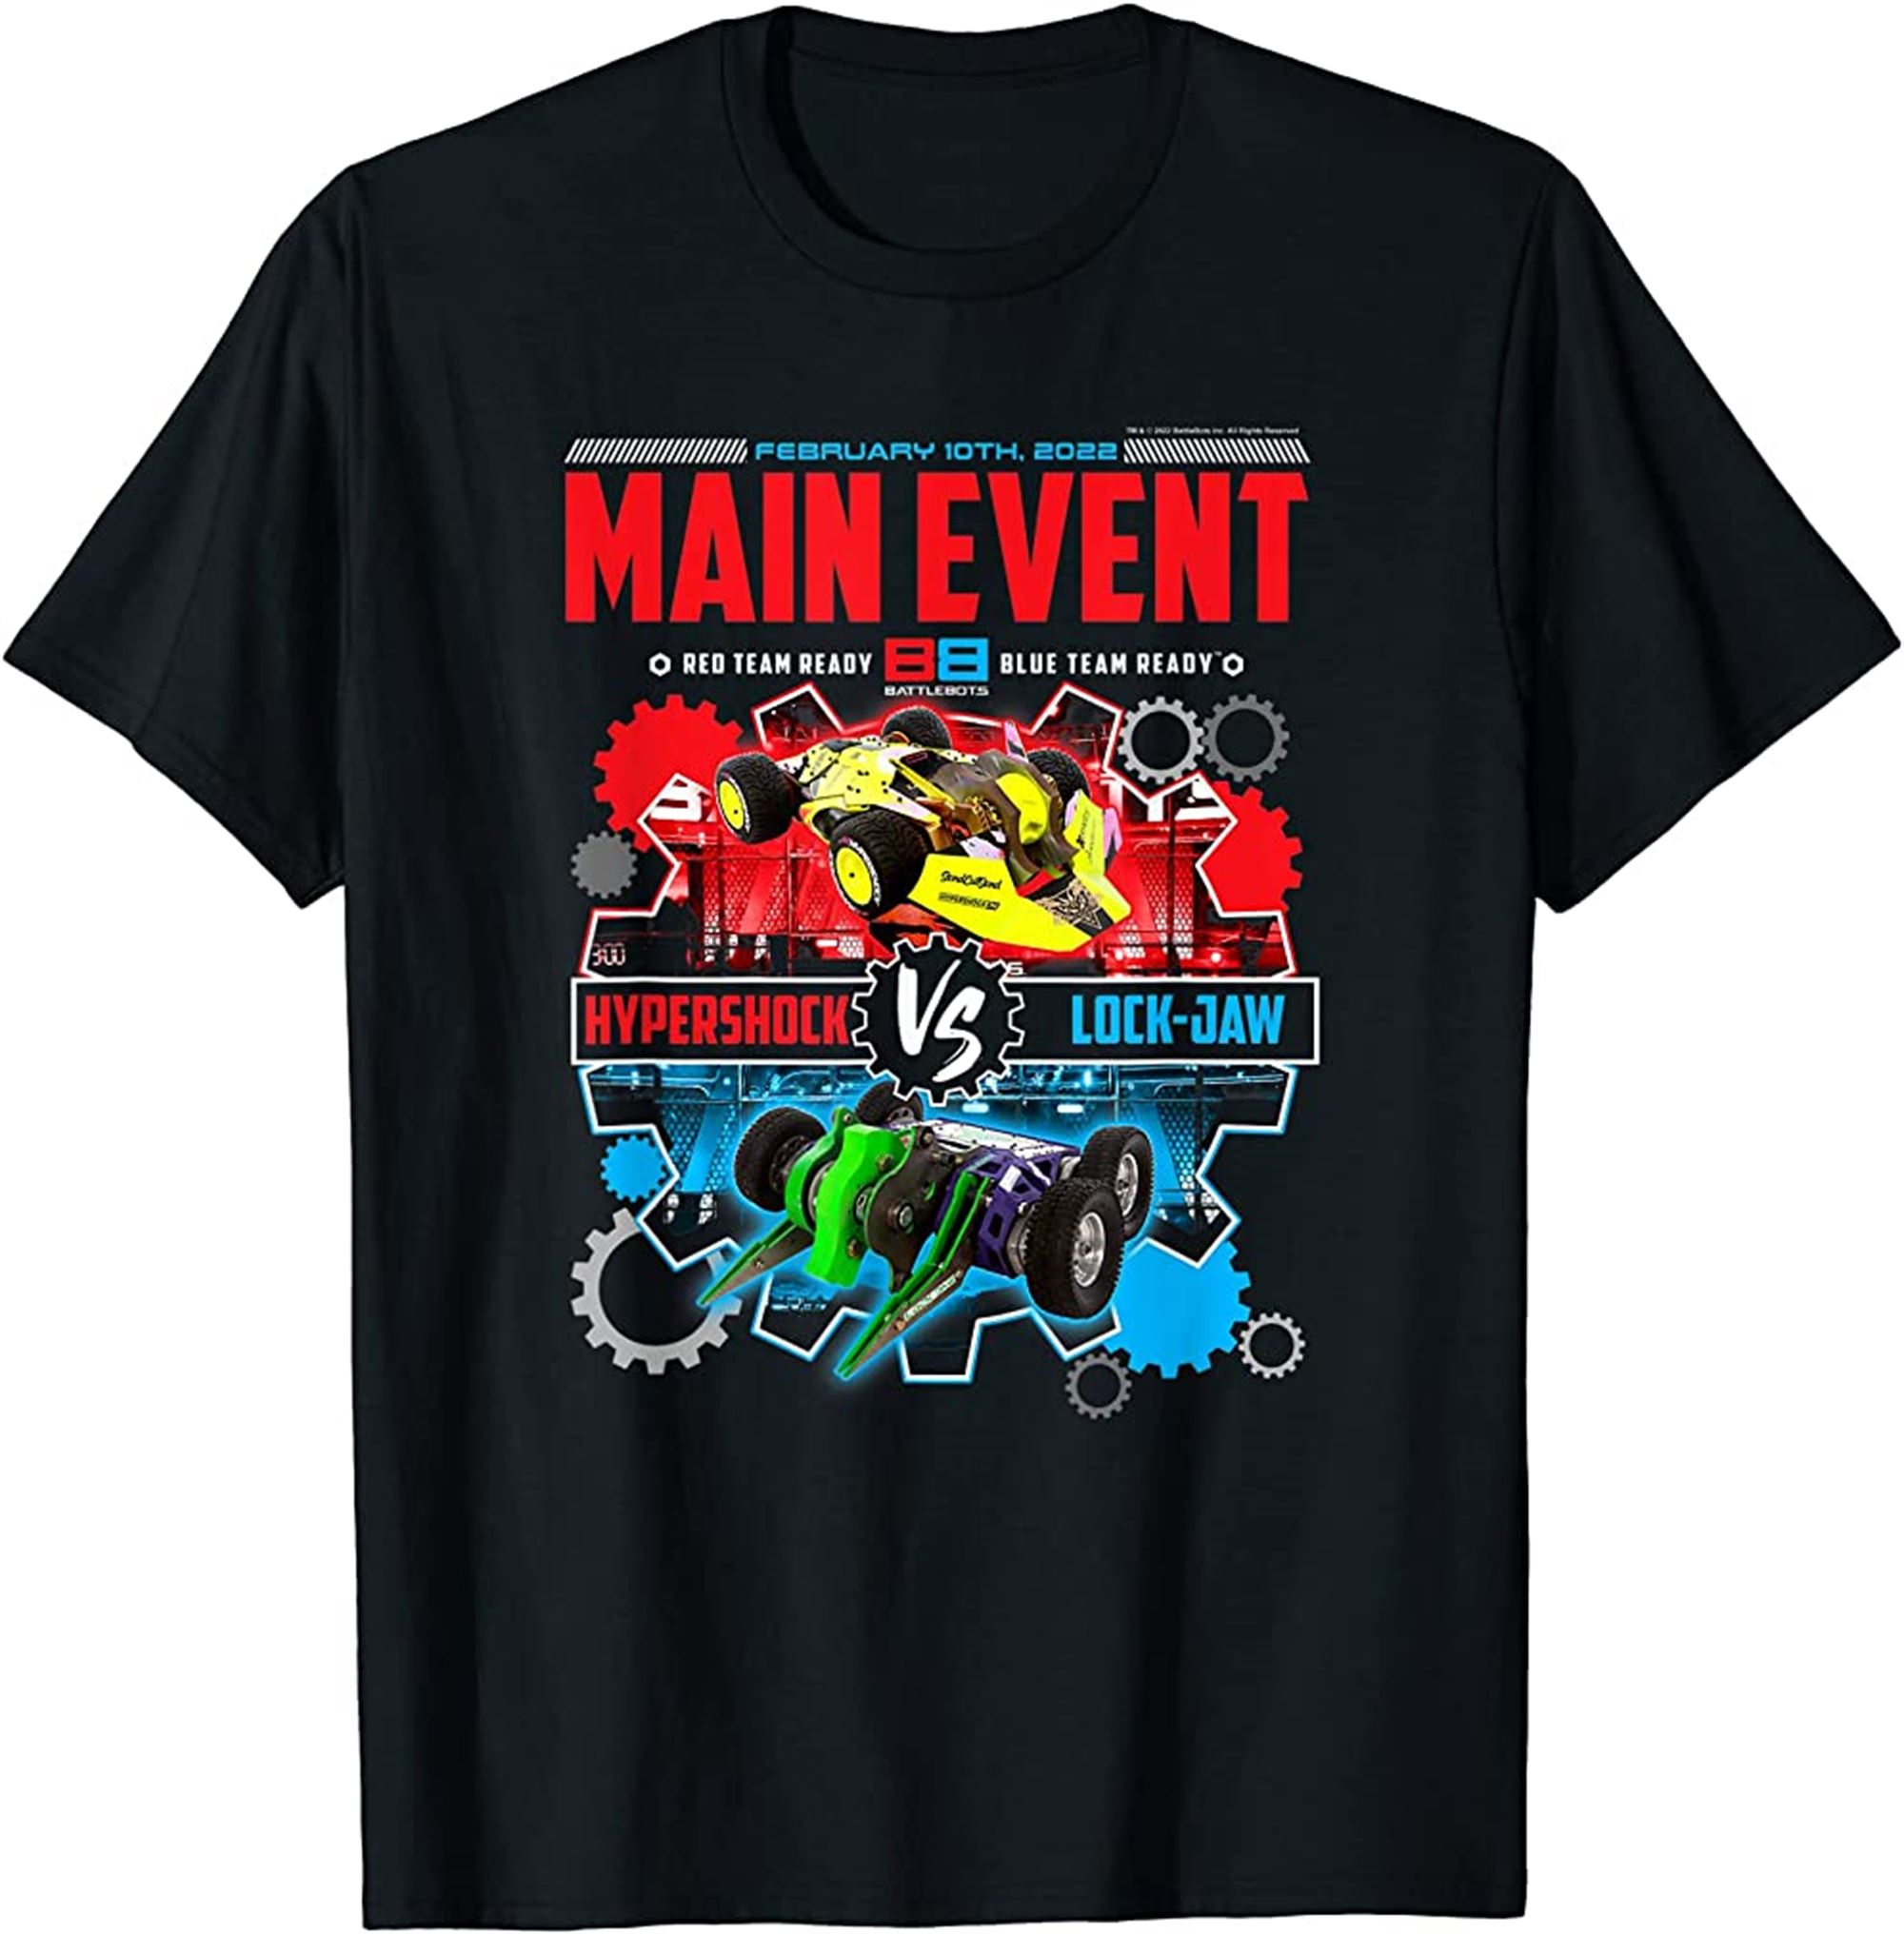 February 10th Main Event Hypershock Vs Lock Jaw Tshirt Full Size Up To 5xl